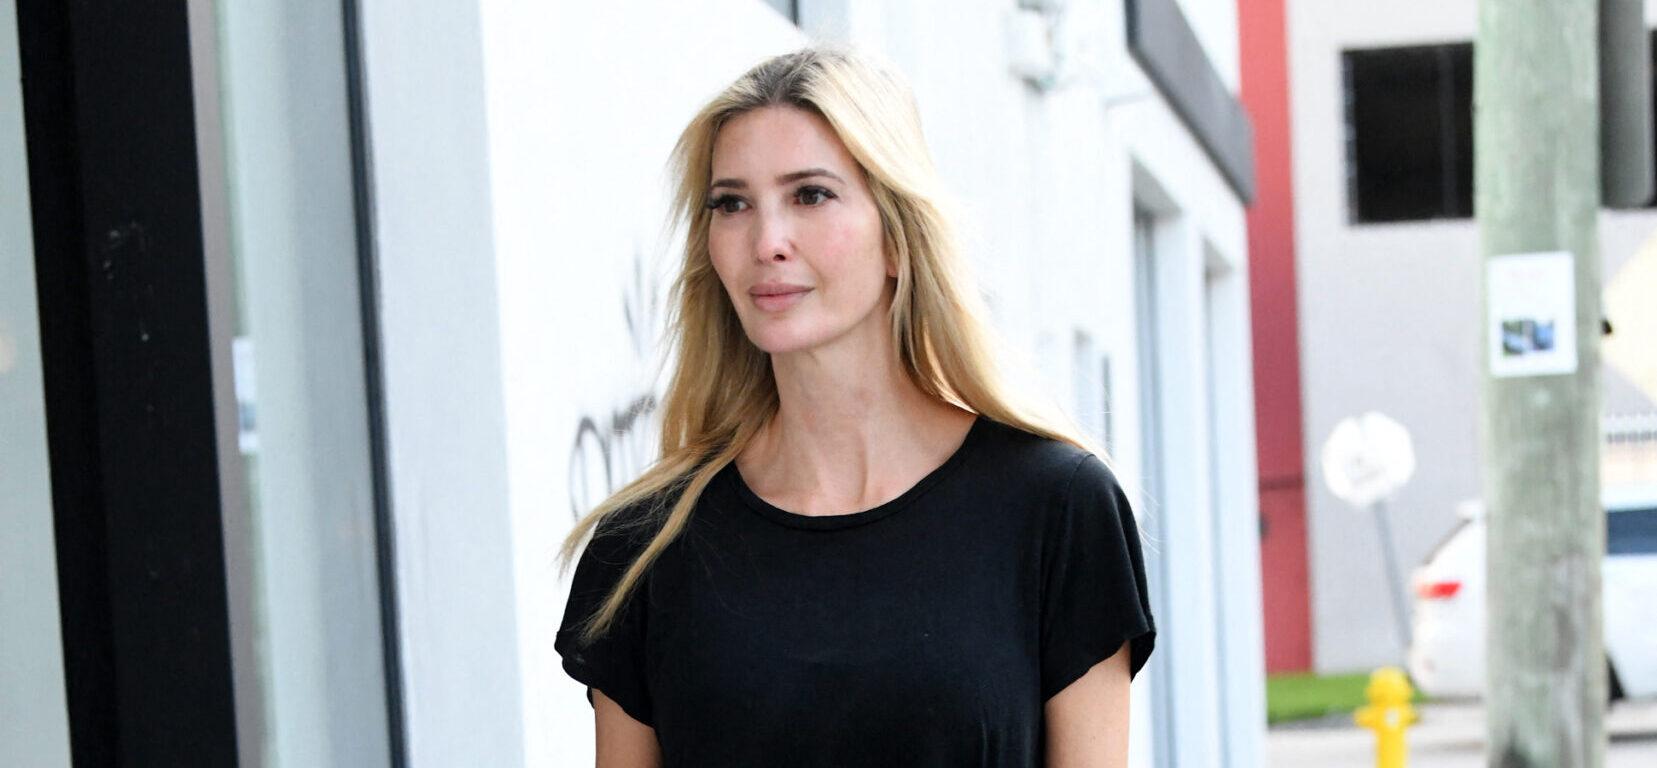 Ivanka Trump Shows A Little More Than Usual Skin In Cropped Outfit: ‘Bringing The Heat’